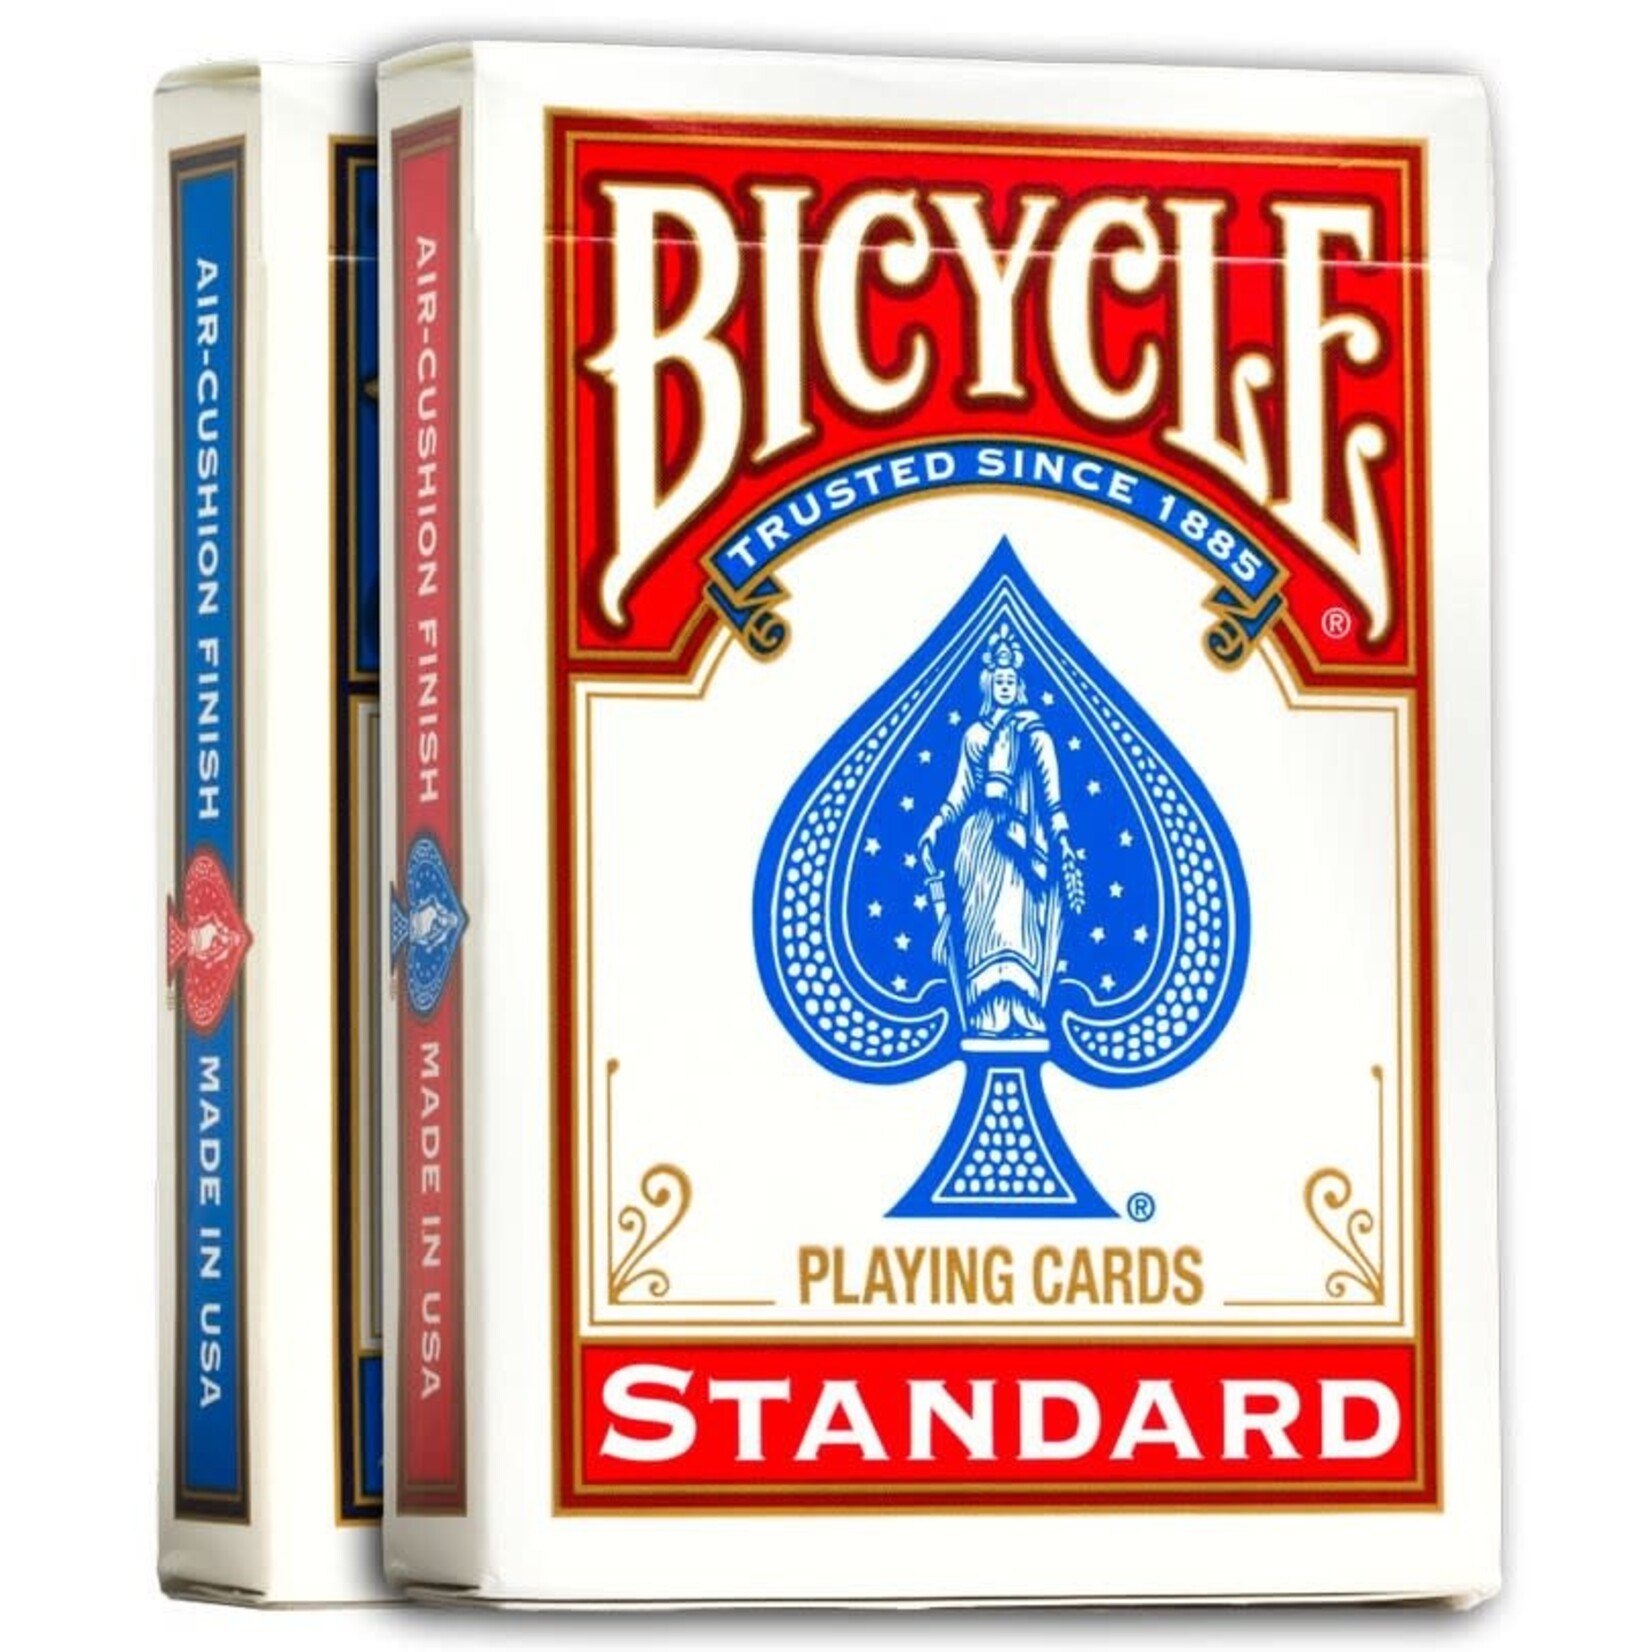 Bicycle Bicycle Playing Cards: Standard Index